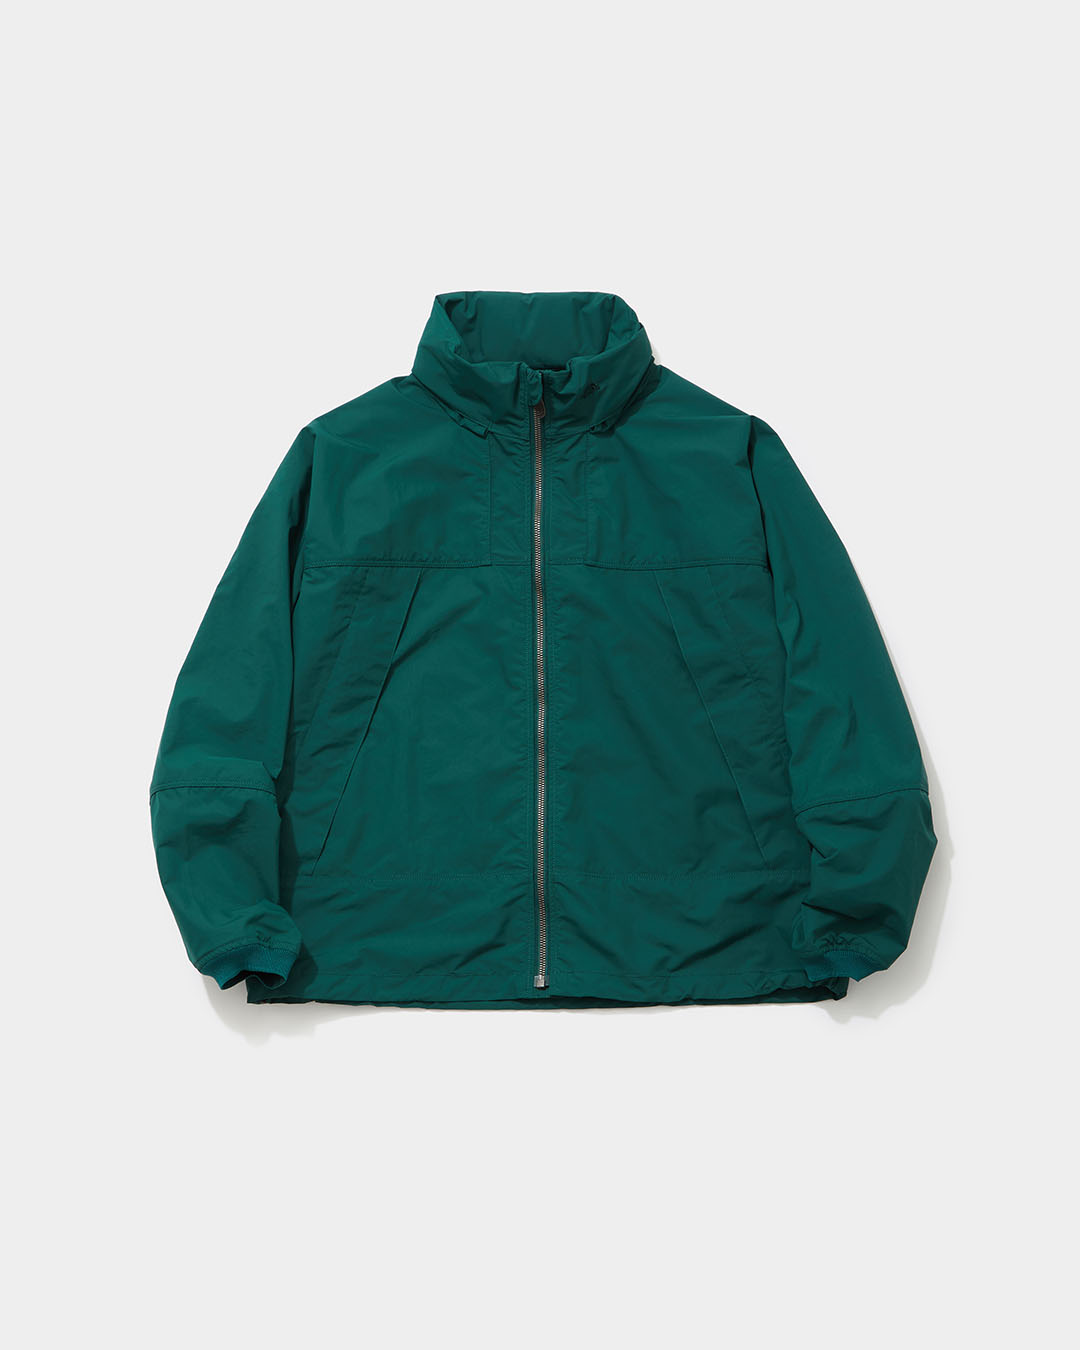 nanamica / THE NORTH FACE PURPLE LABEL / Featured Product vol.13